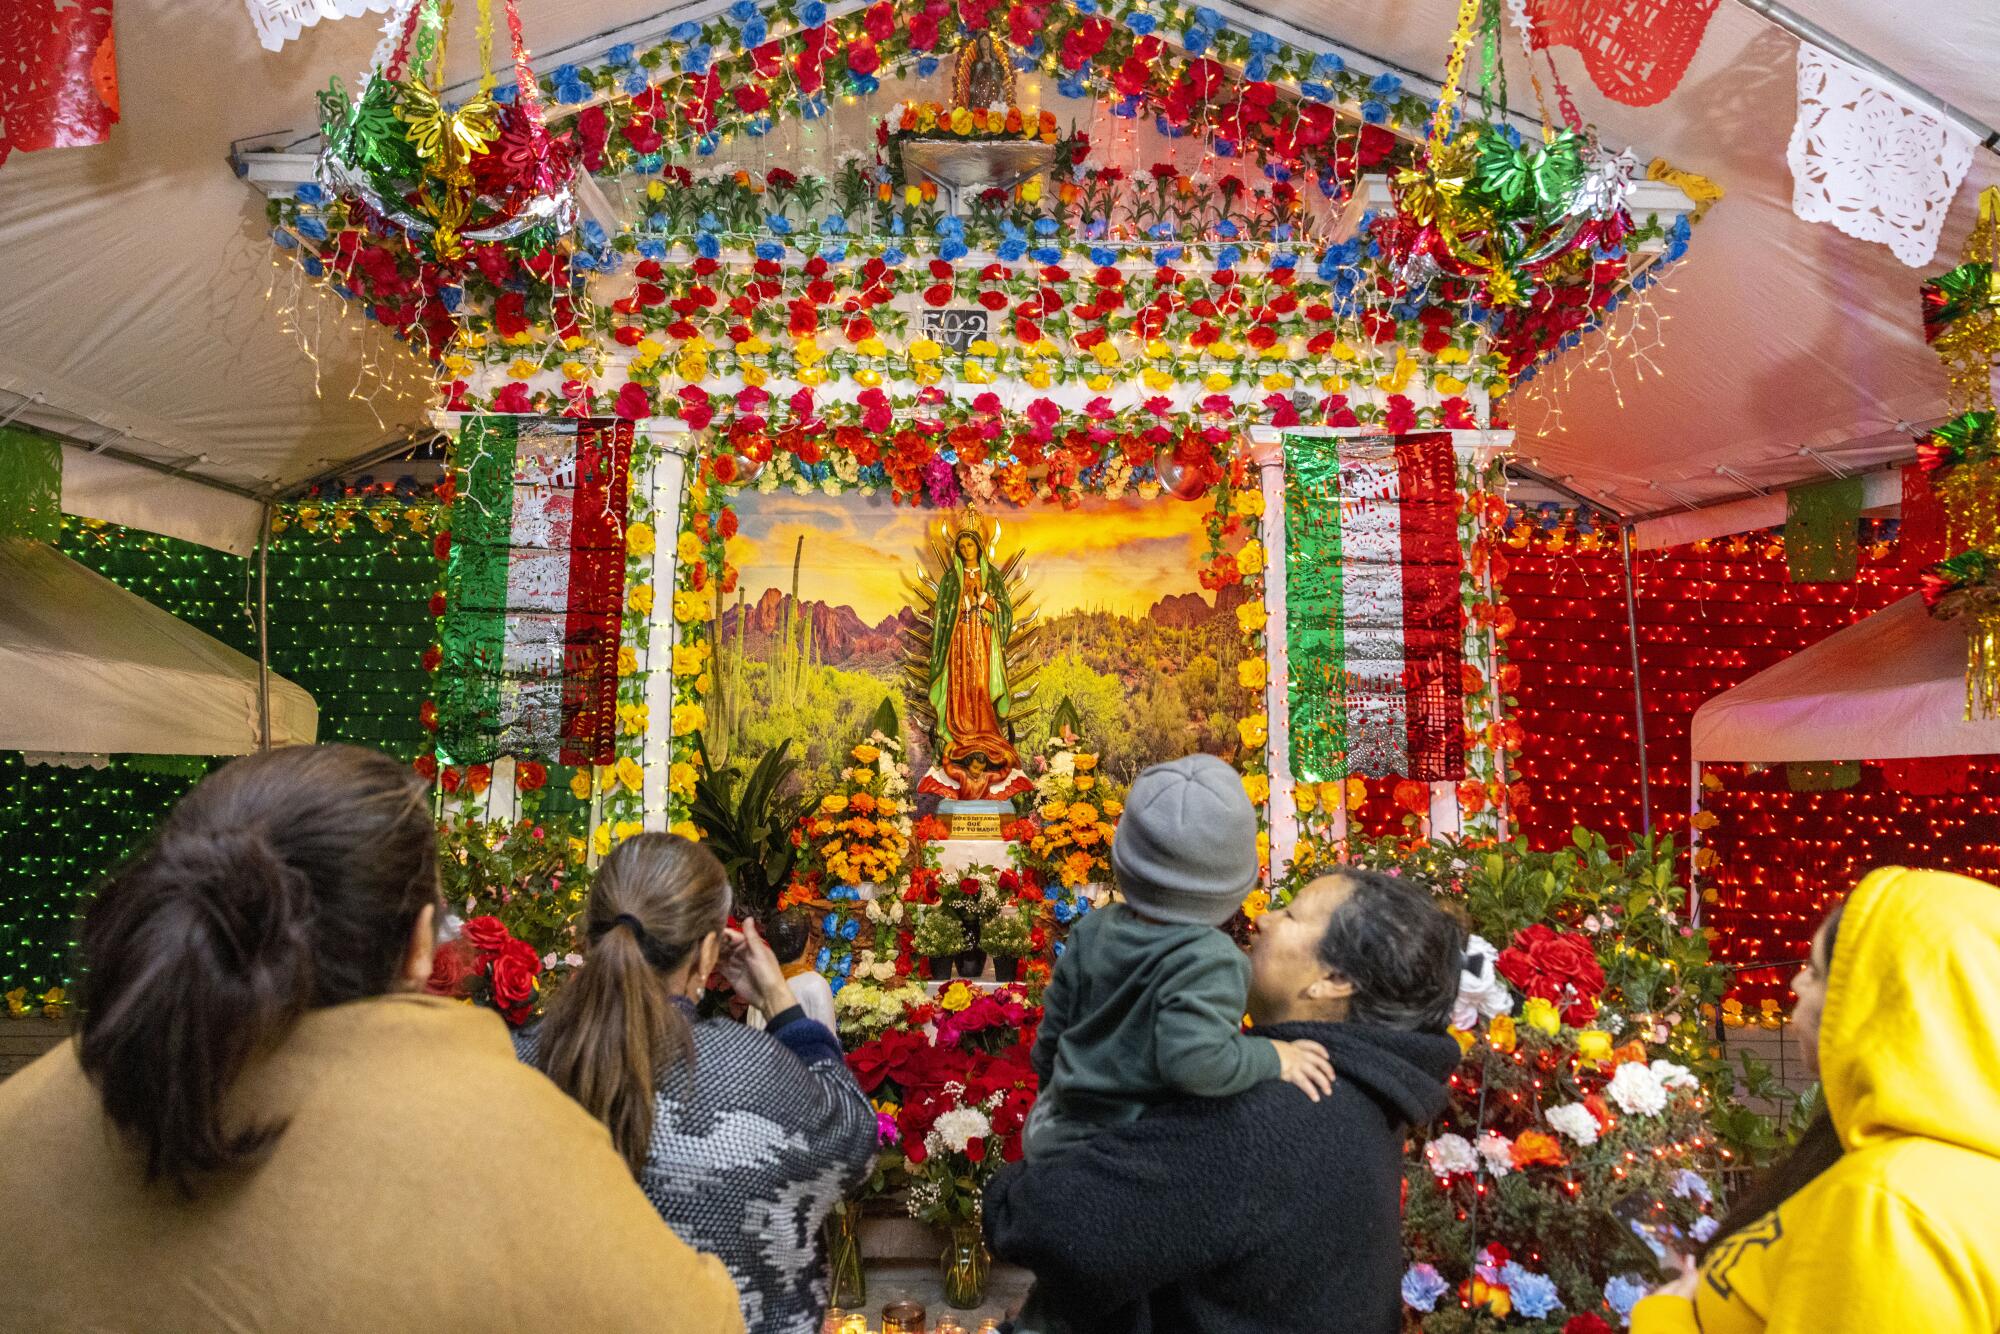 A shrine in honor of the Virgen de Guadalupe at a home in Santa Ana.